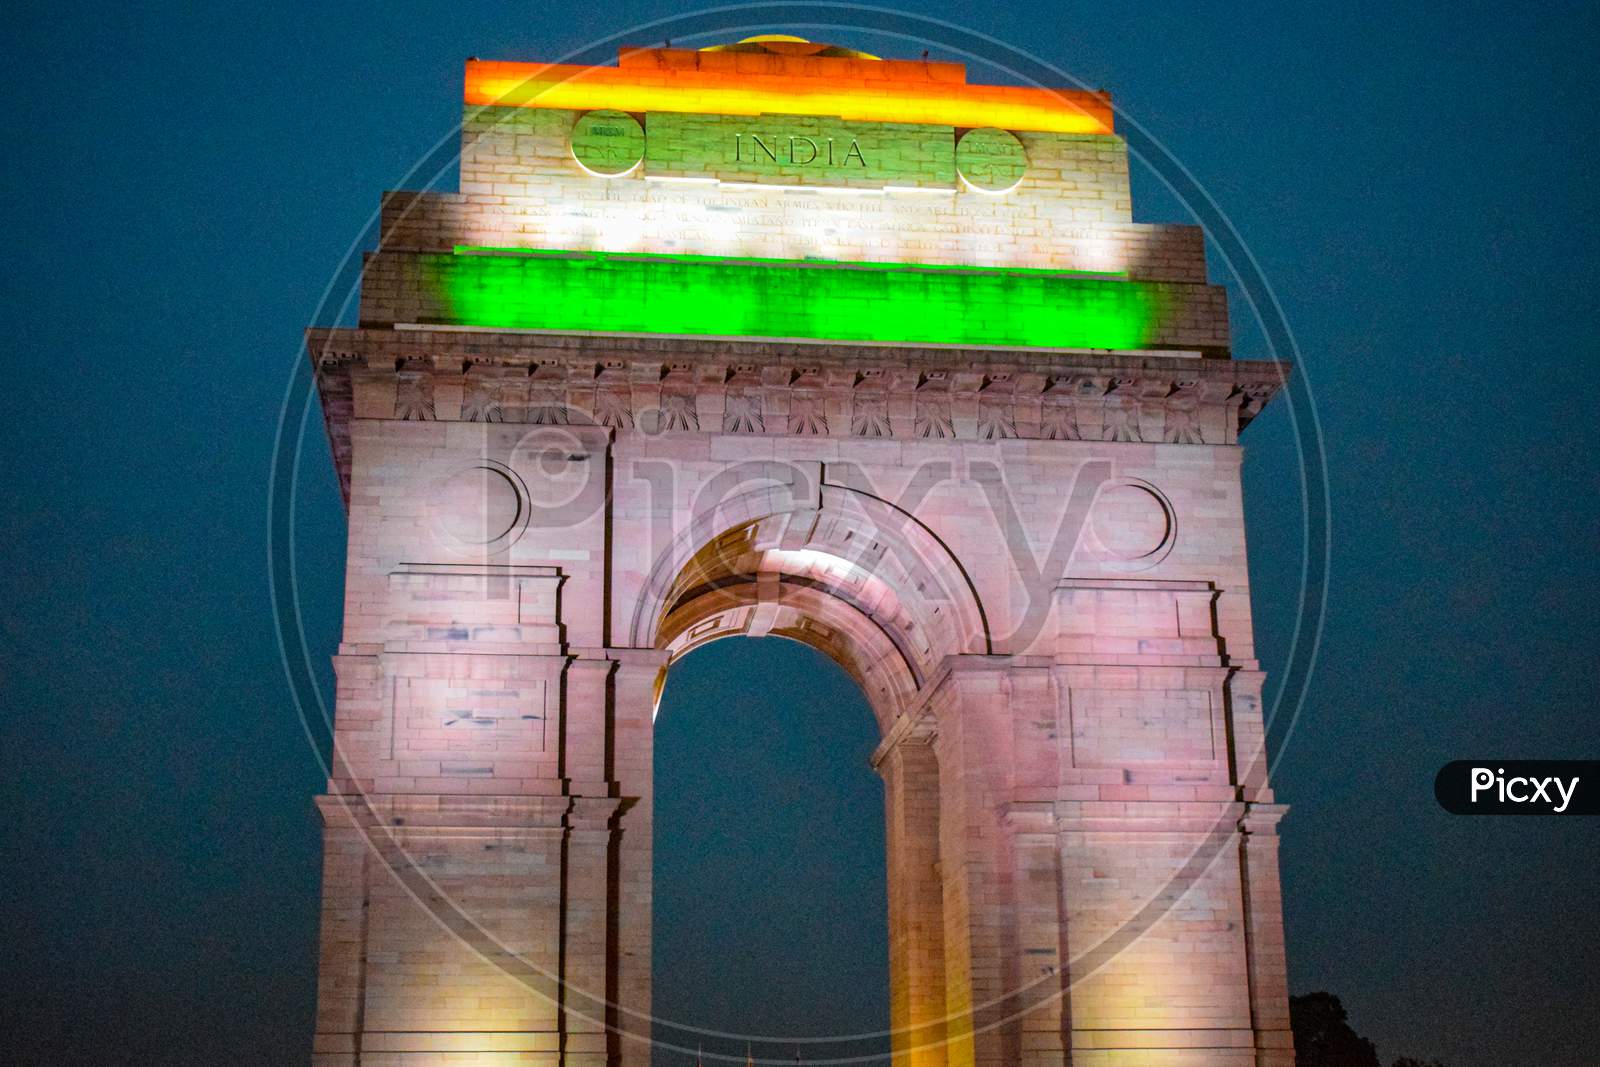 Evening View Of India Gate In Delhi India, India Gate View With Tri Colour At The Top